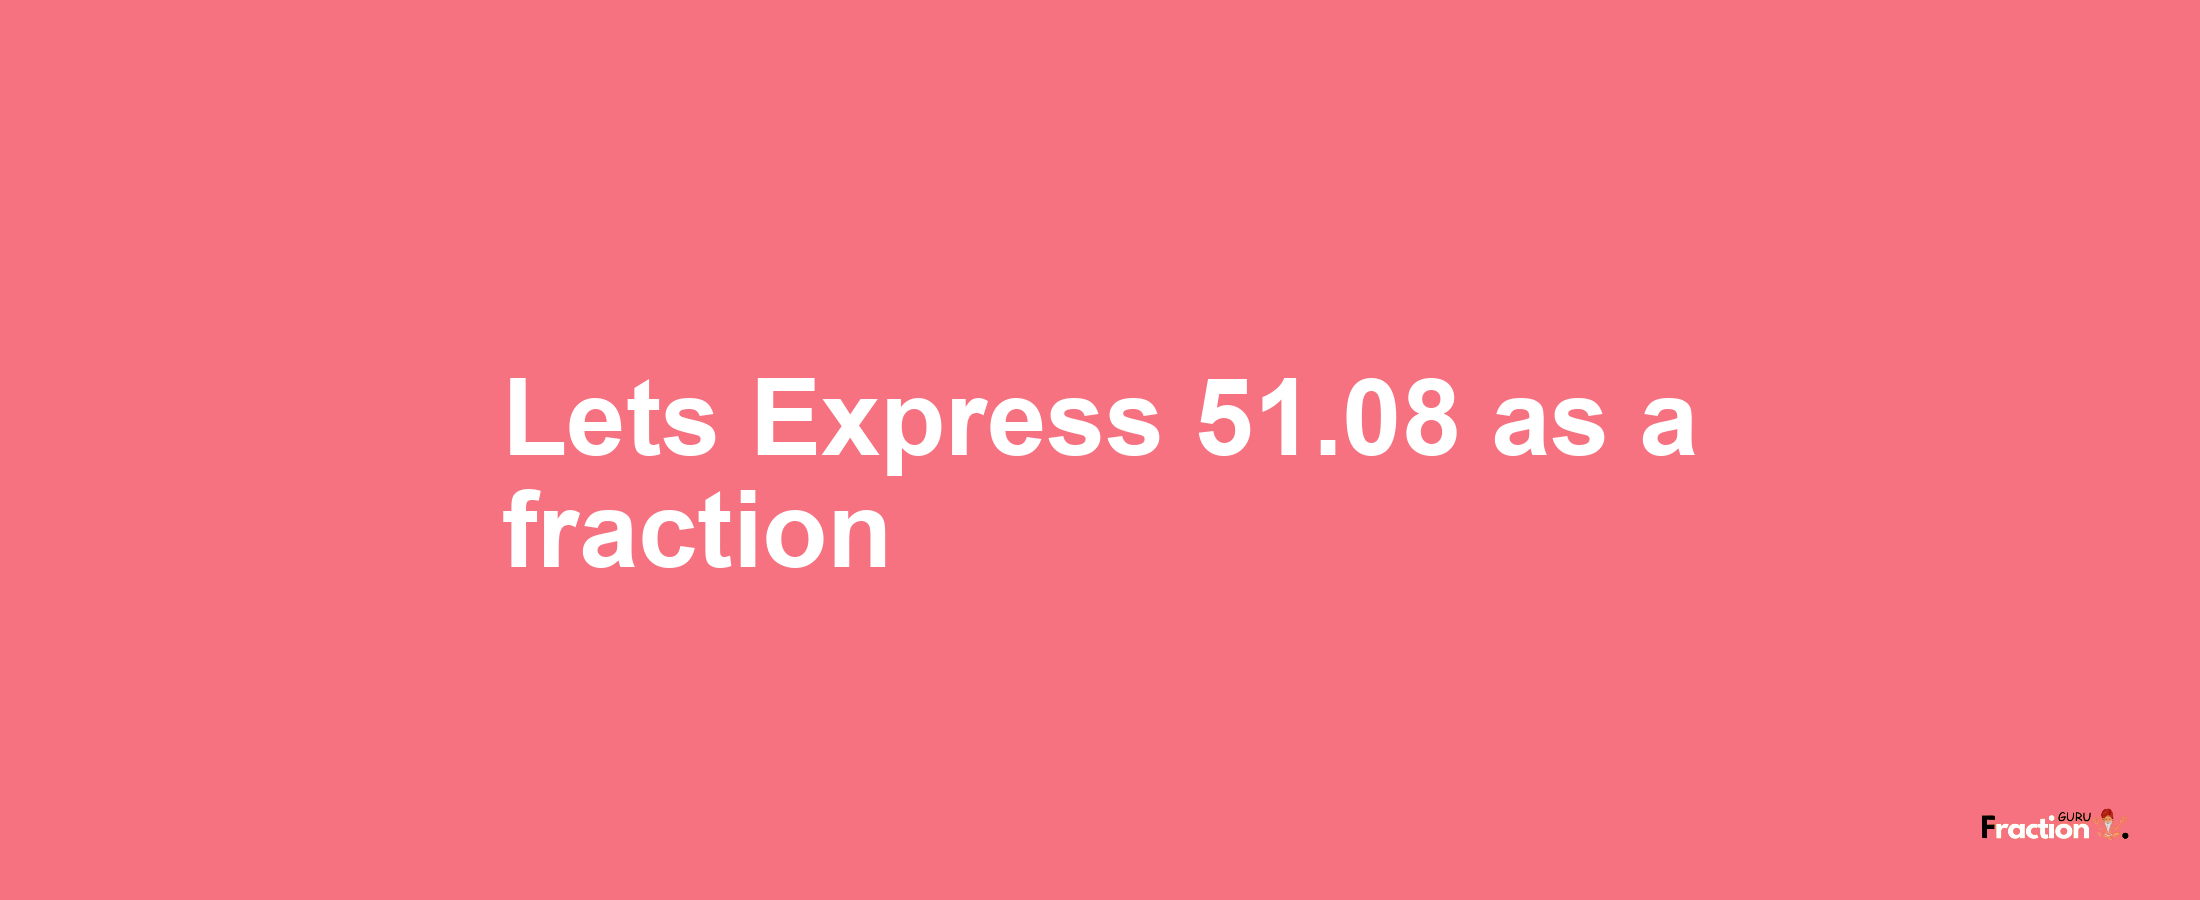 Lets Express 51.08 as afraction